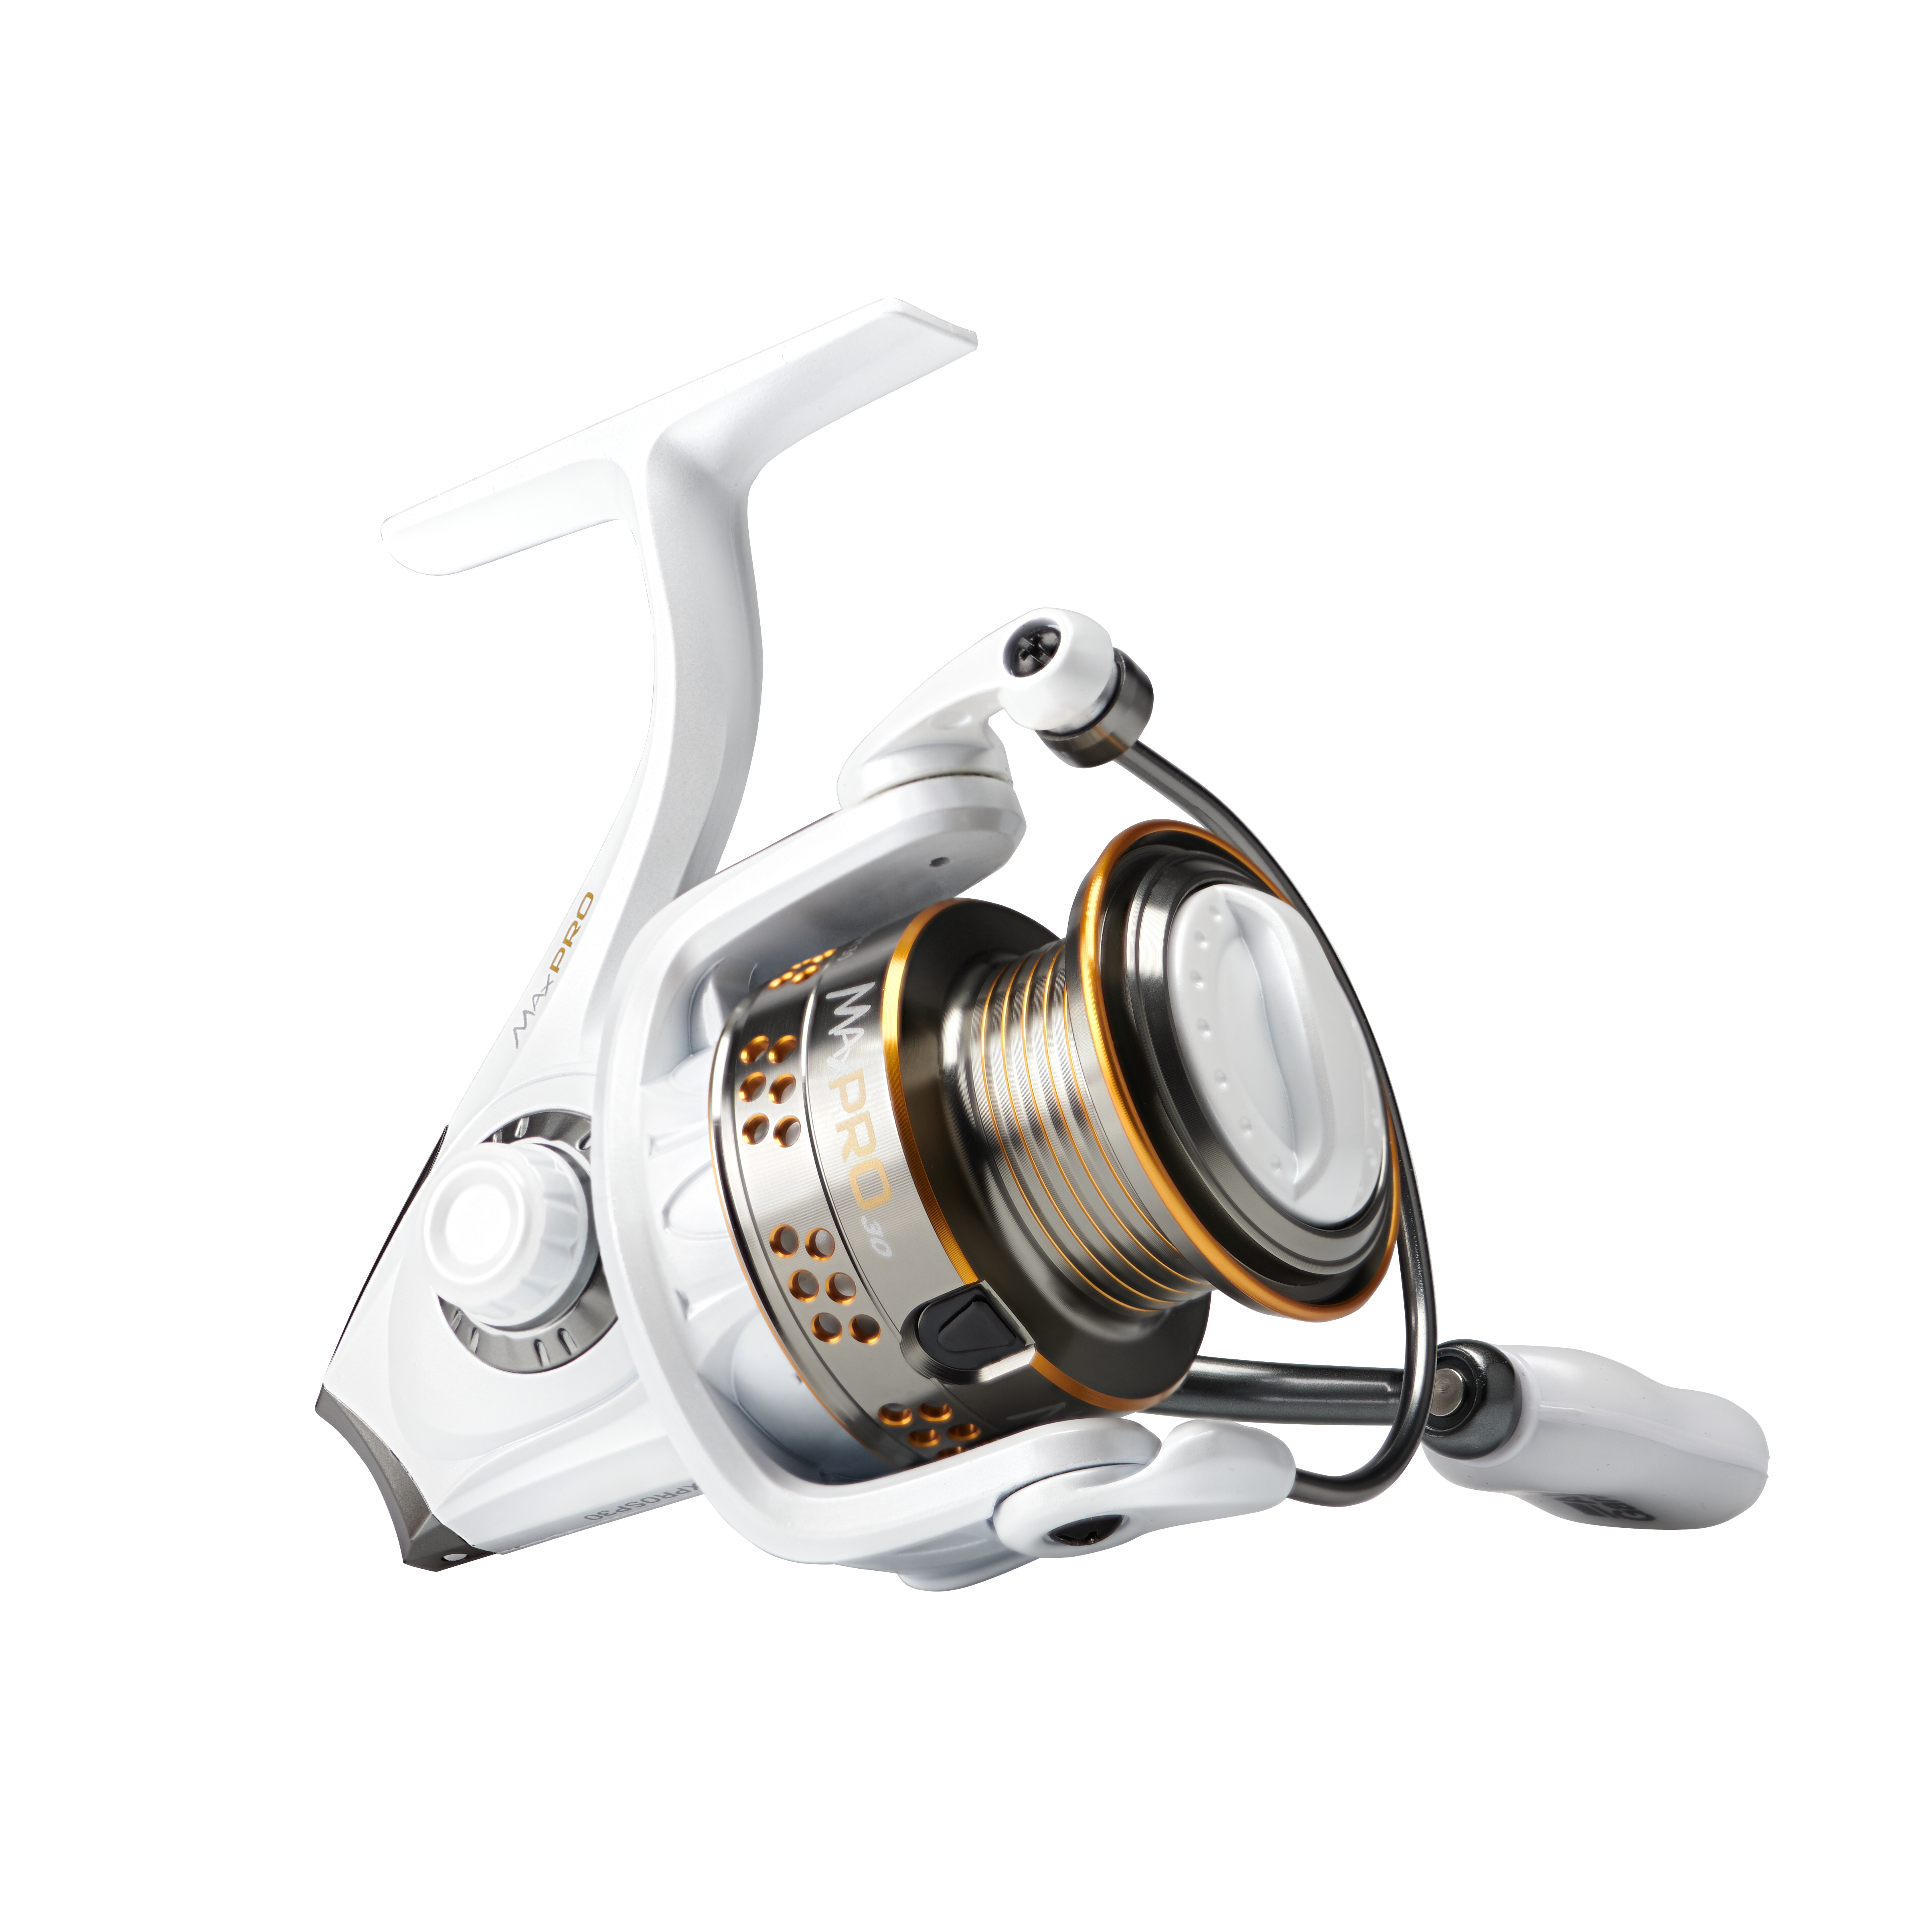 Abu Garcia Max Pro Spinning Reel , Up to $2.00 Off with Free S&H